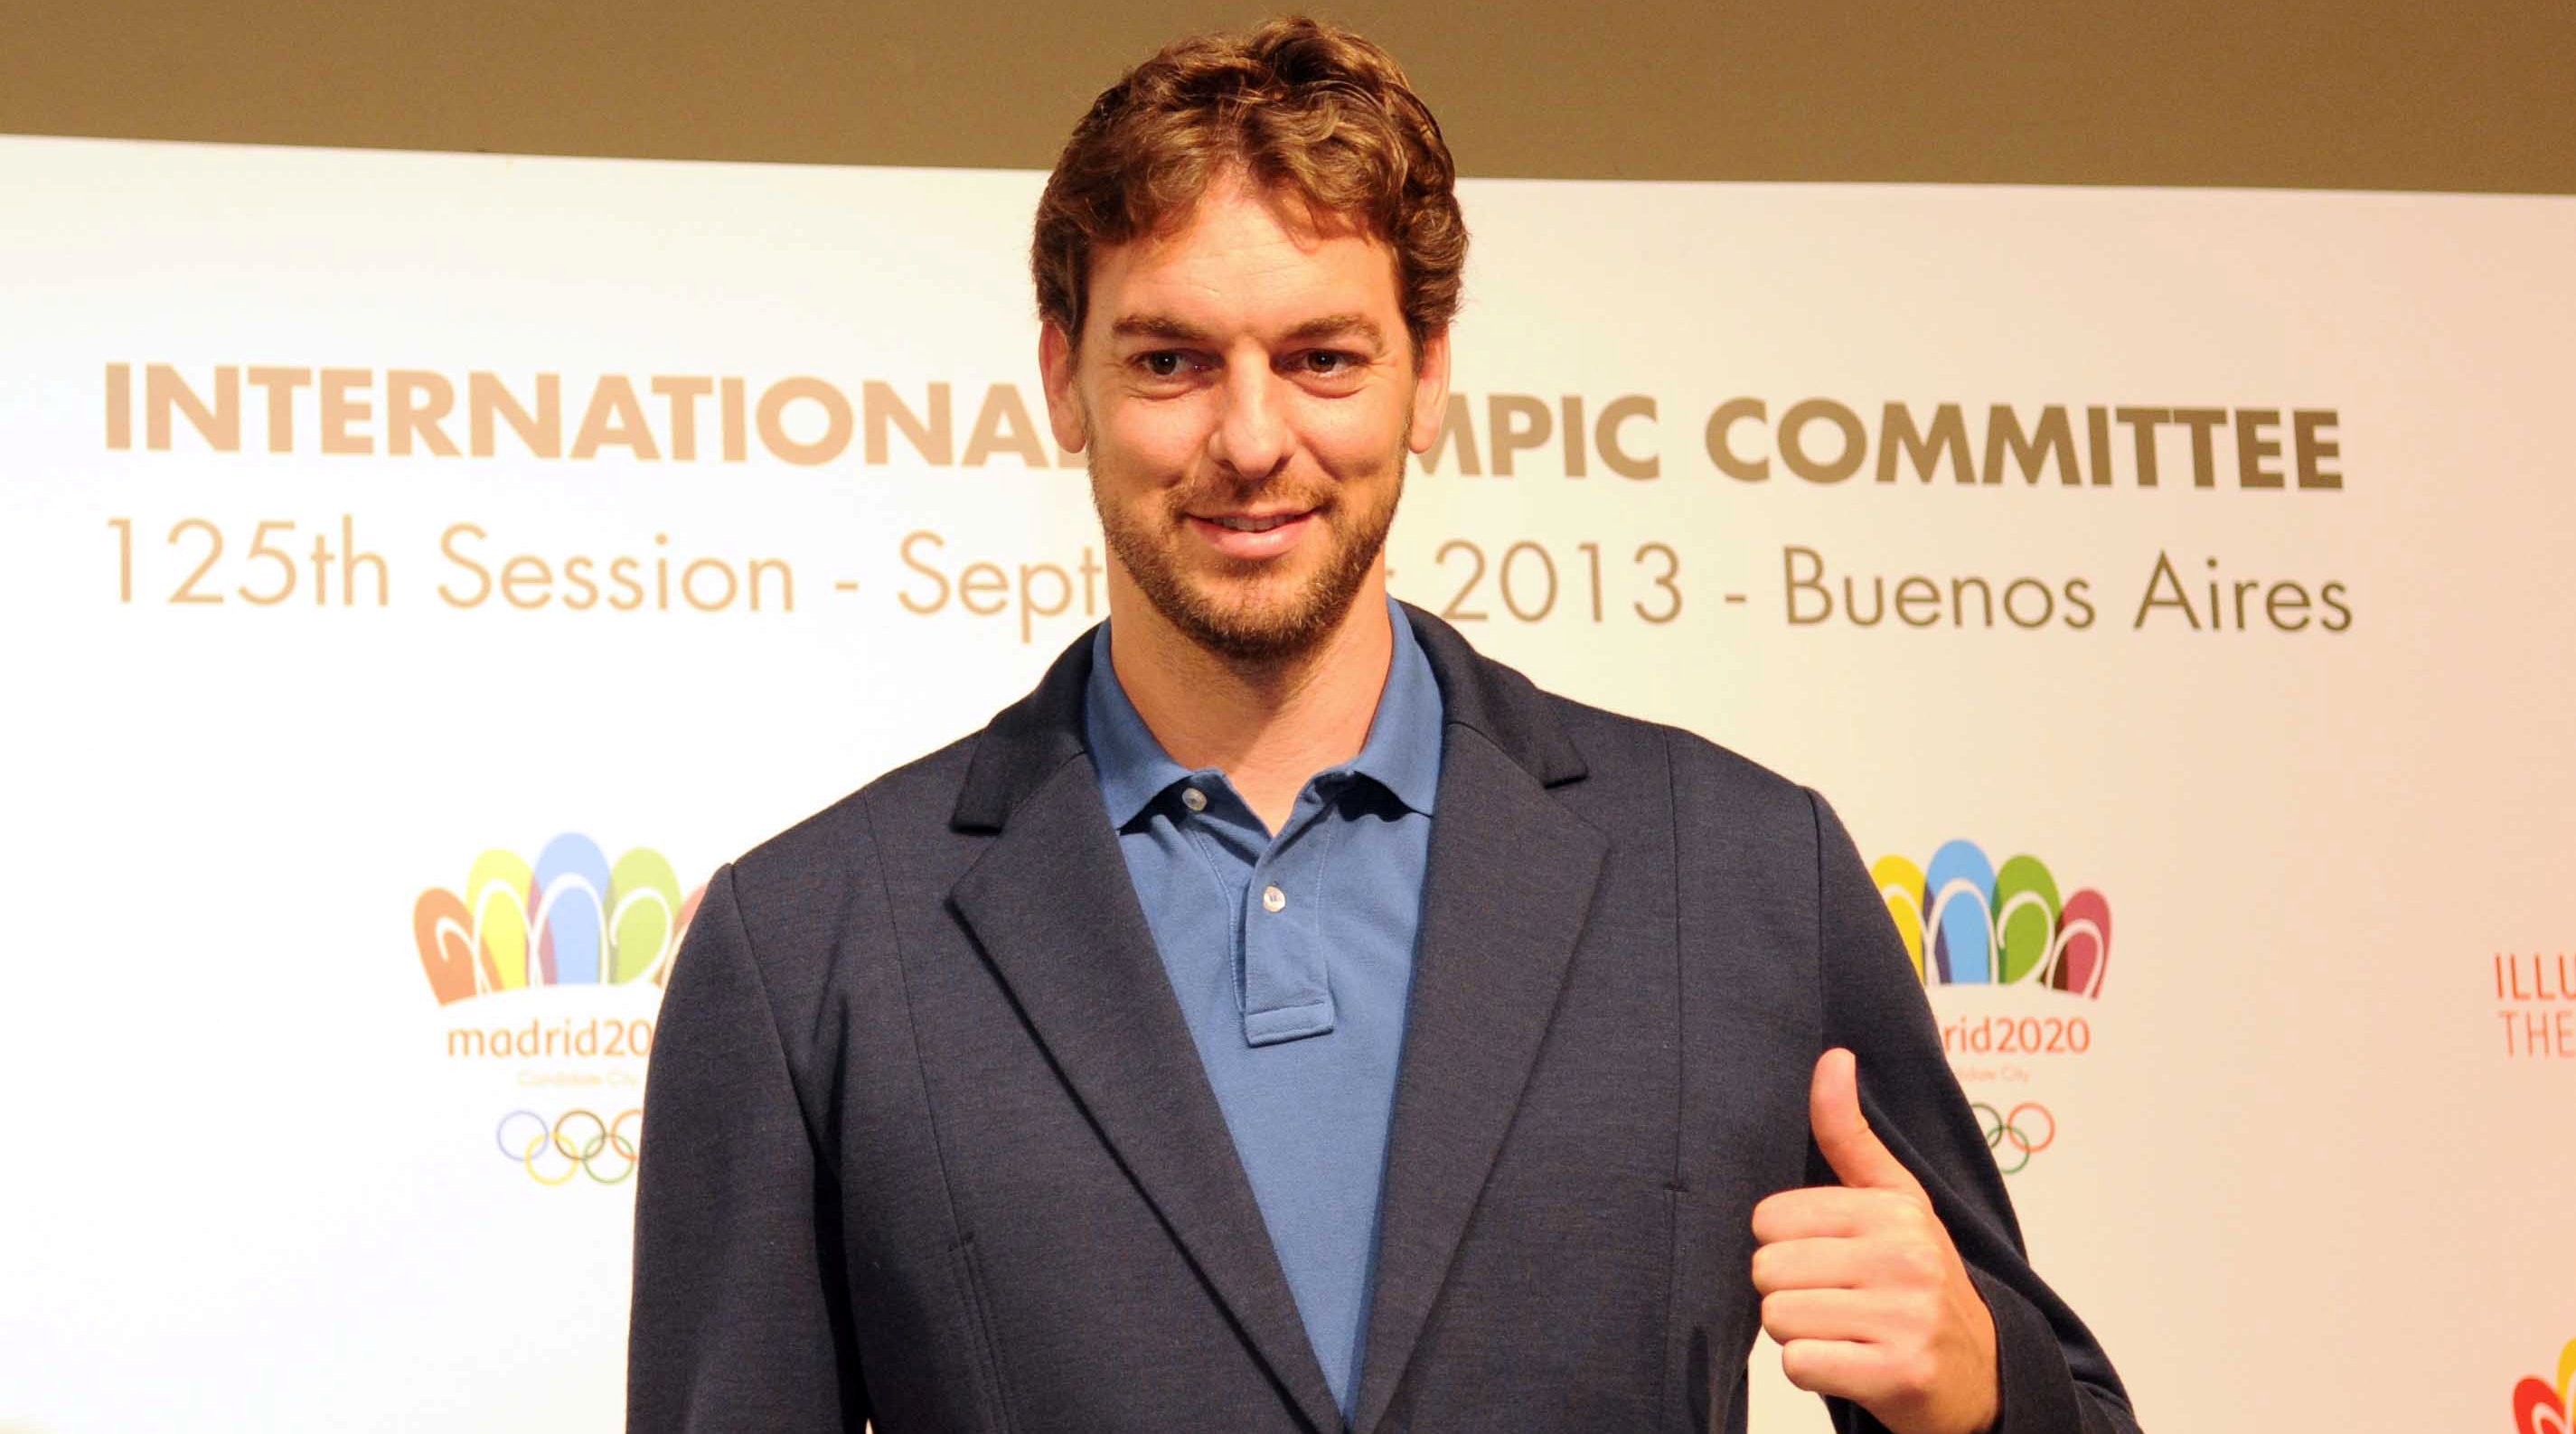 Pau Gasol is here in Buenos Aires